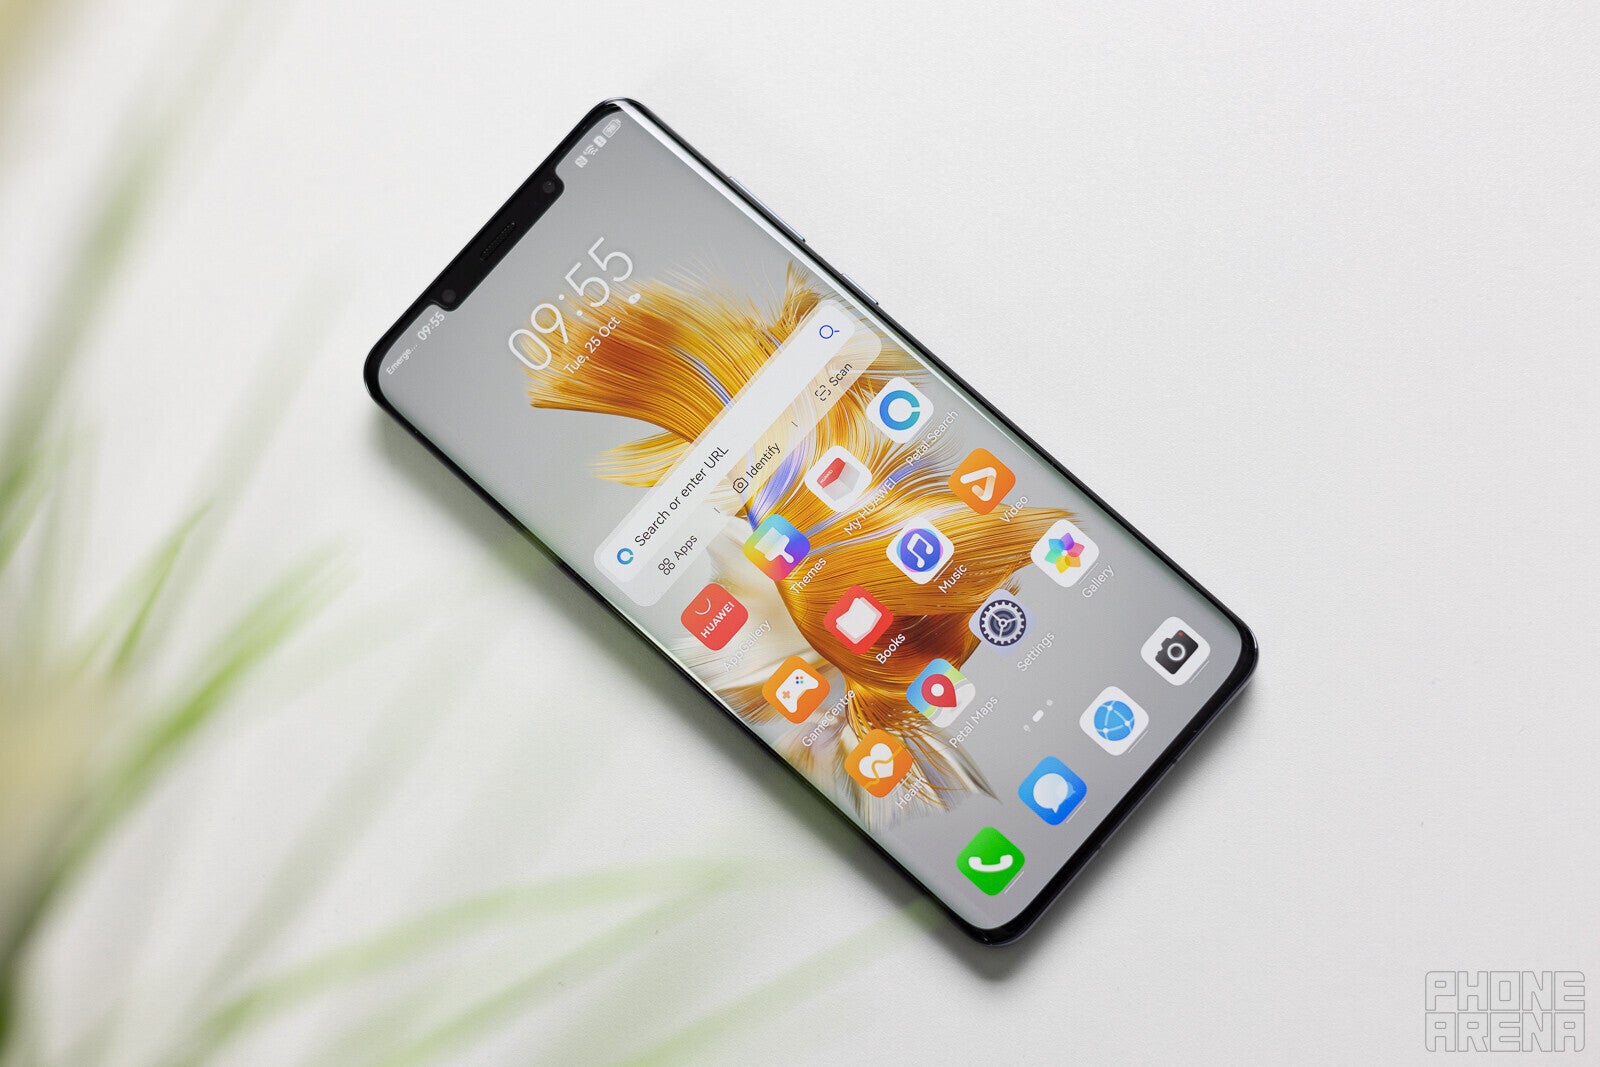 The release of the Huawei Mate 50 Pro was greeted by strong demand and long lines in China - Samsung is licensing 5G technology from Huawei, potentially to improve its 5G mobile modems